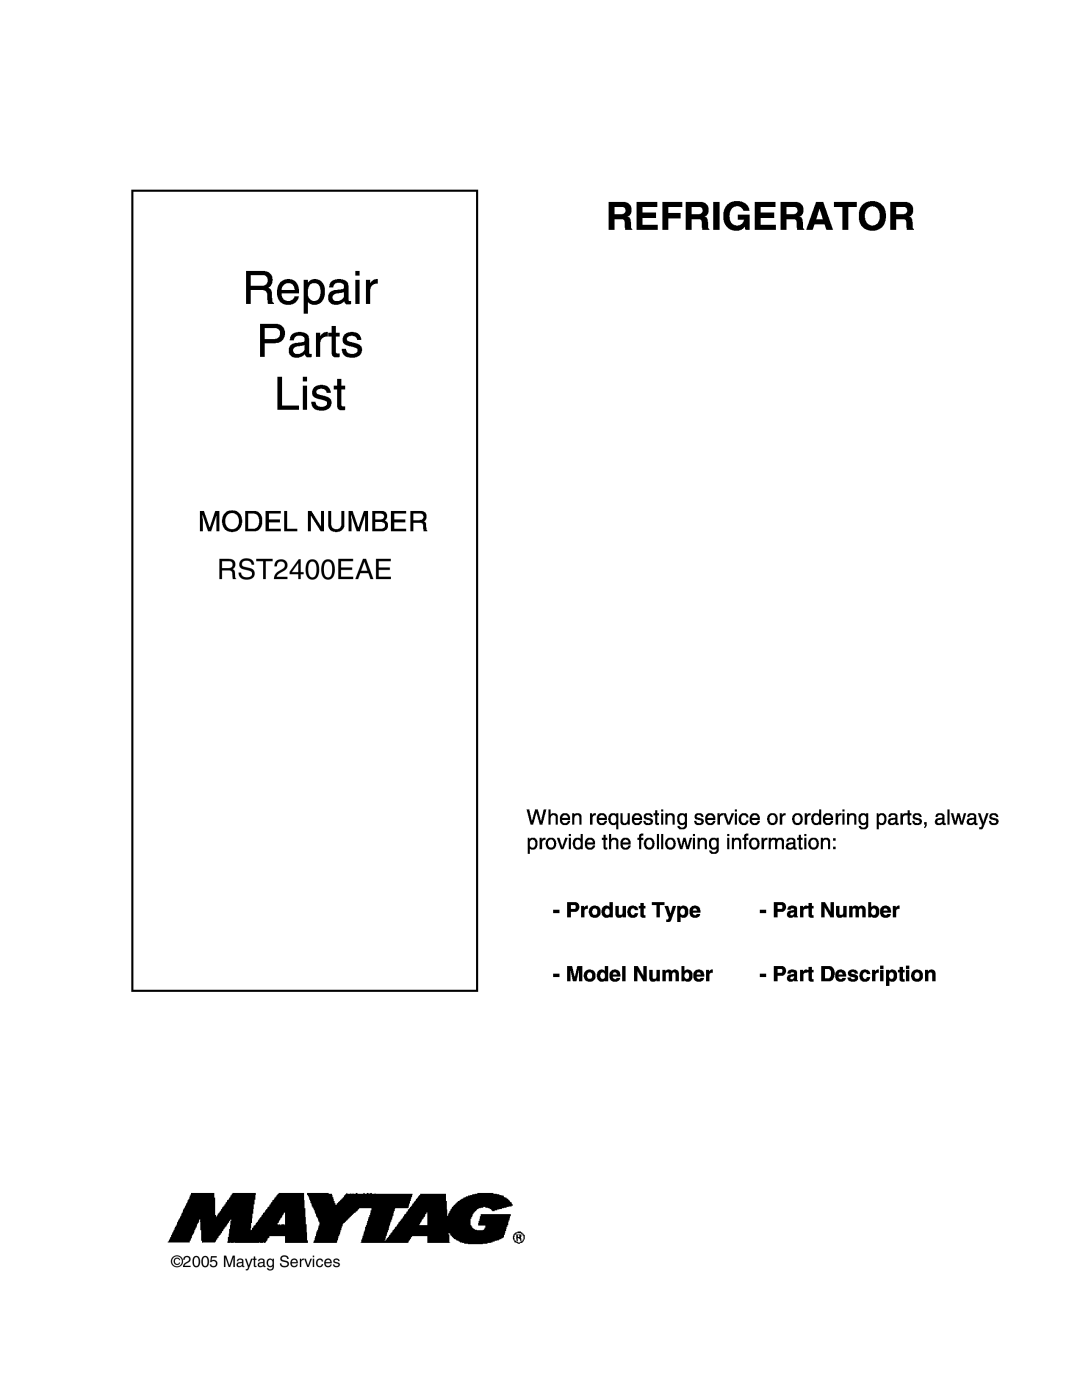 Maytag RST2400EAE manual Product Type, Part Number, Model Number, Part Description, Repair Parts List, Refrigerator 